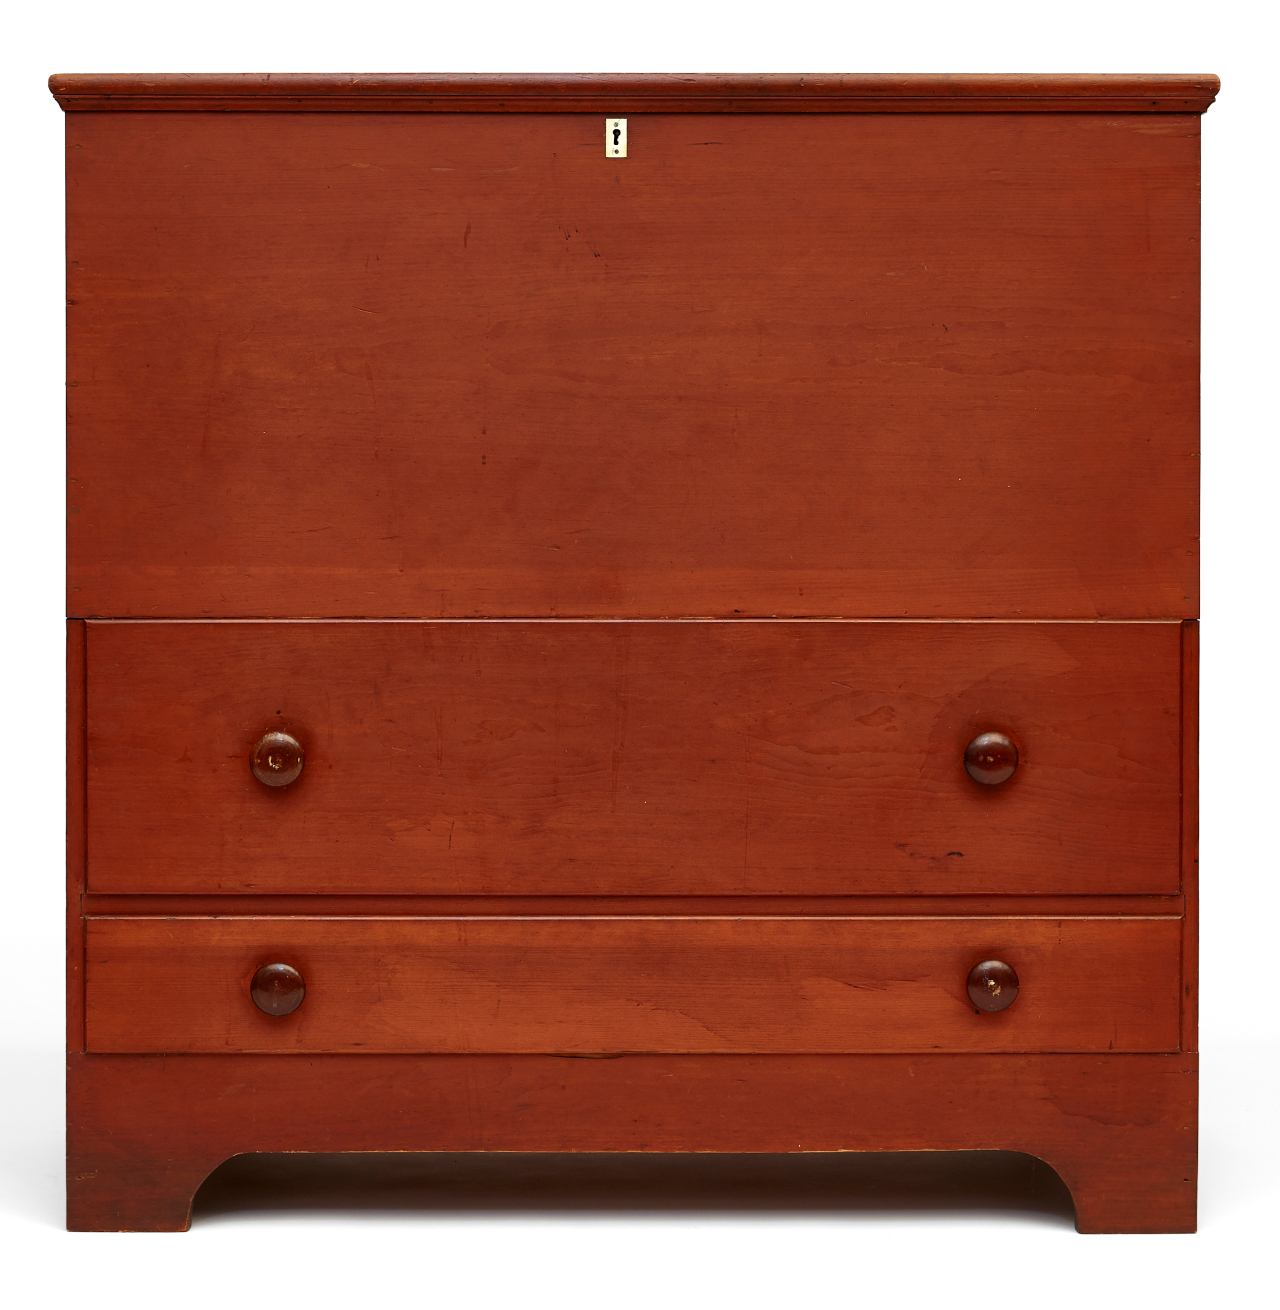 A small chest of drawers with two drawers.